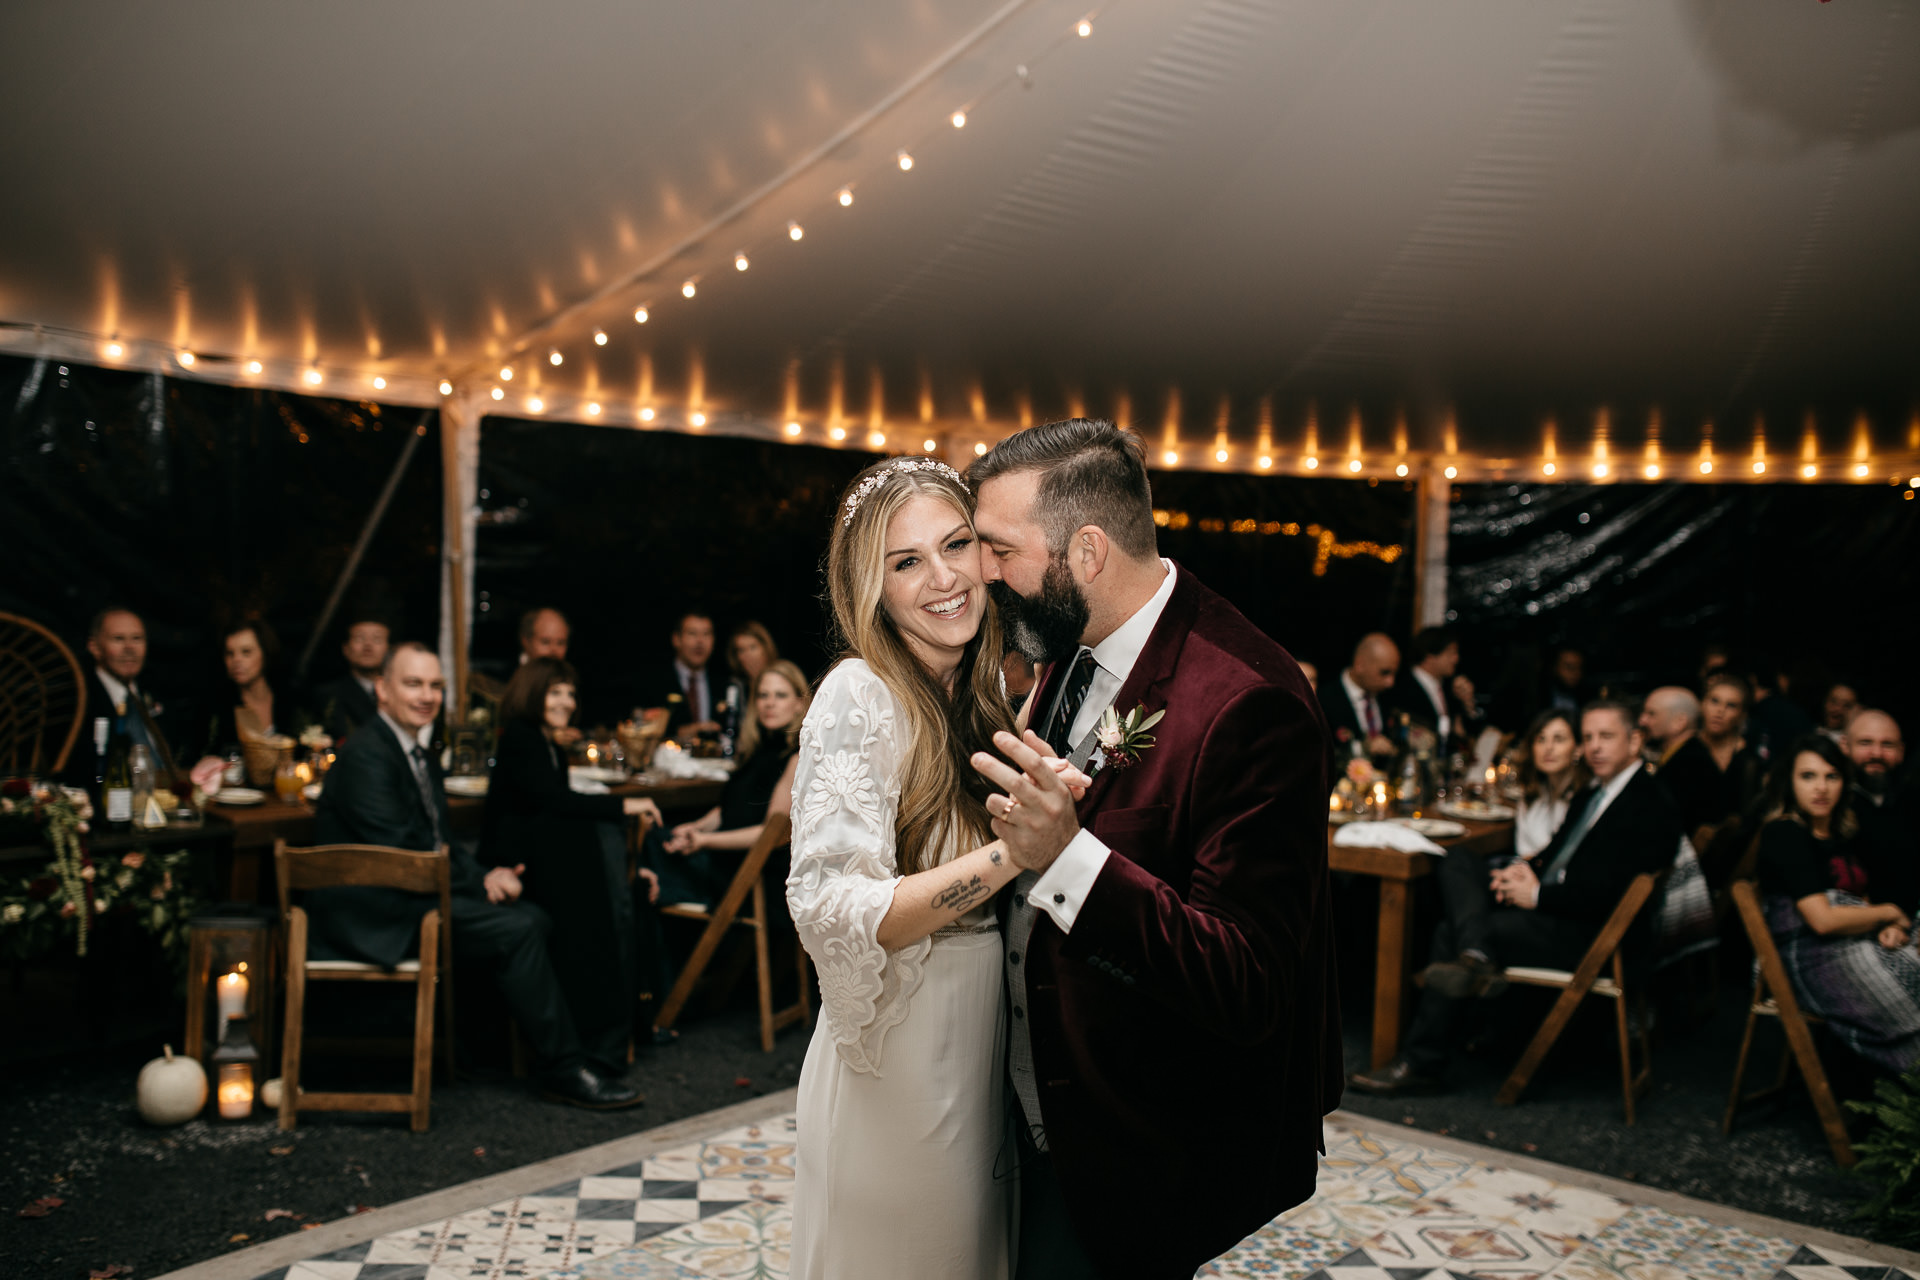 Robyn & Jim Catskills Fall Wedding at Foxfire Mountain House by Jean-Laurent Gaudy Photography